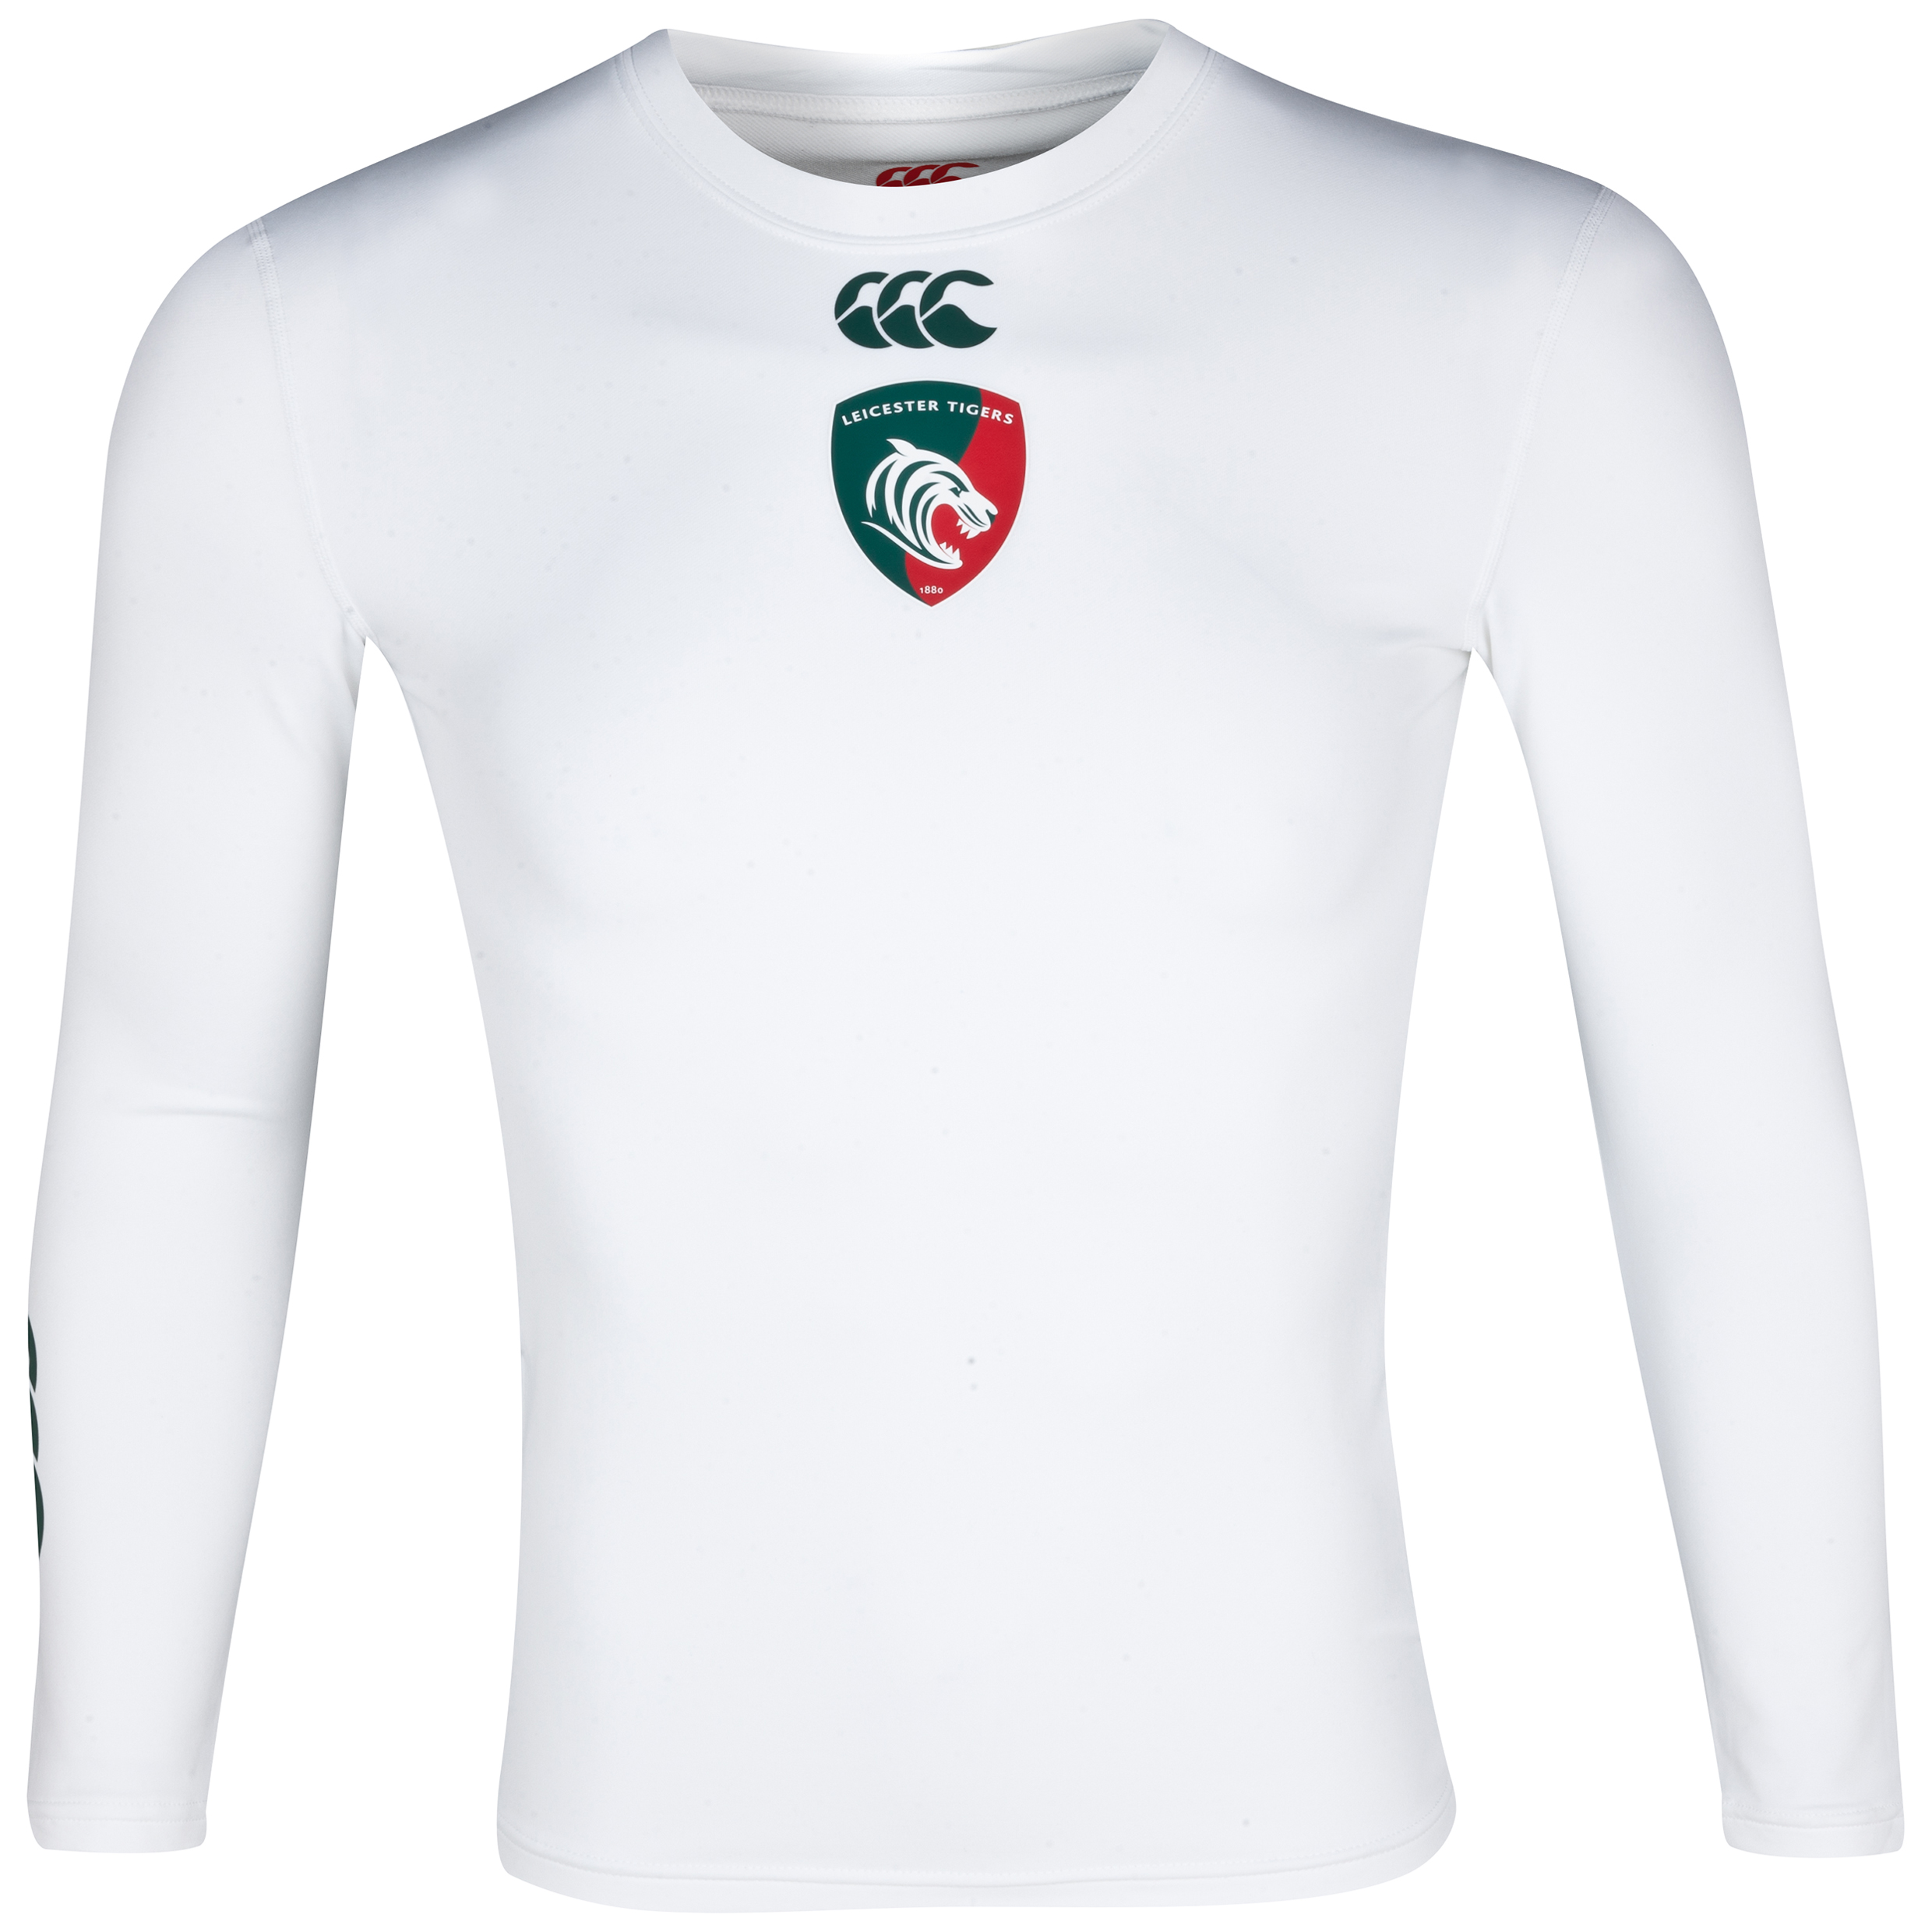 Leicester Tigers Alternate Supporters Cold Baselayer 2013/14 - Long Sleeved